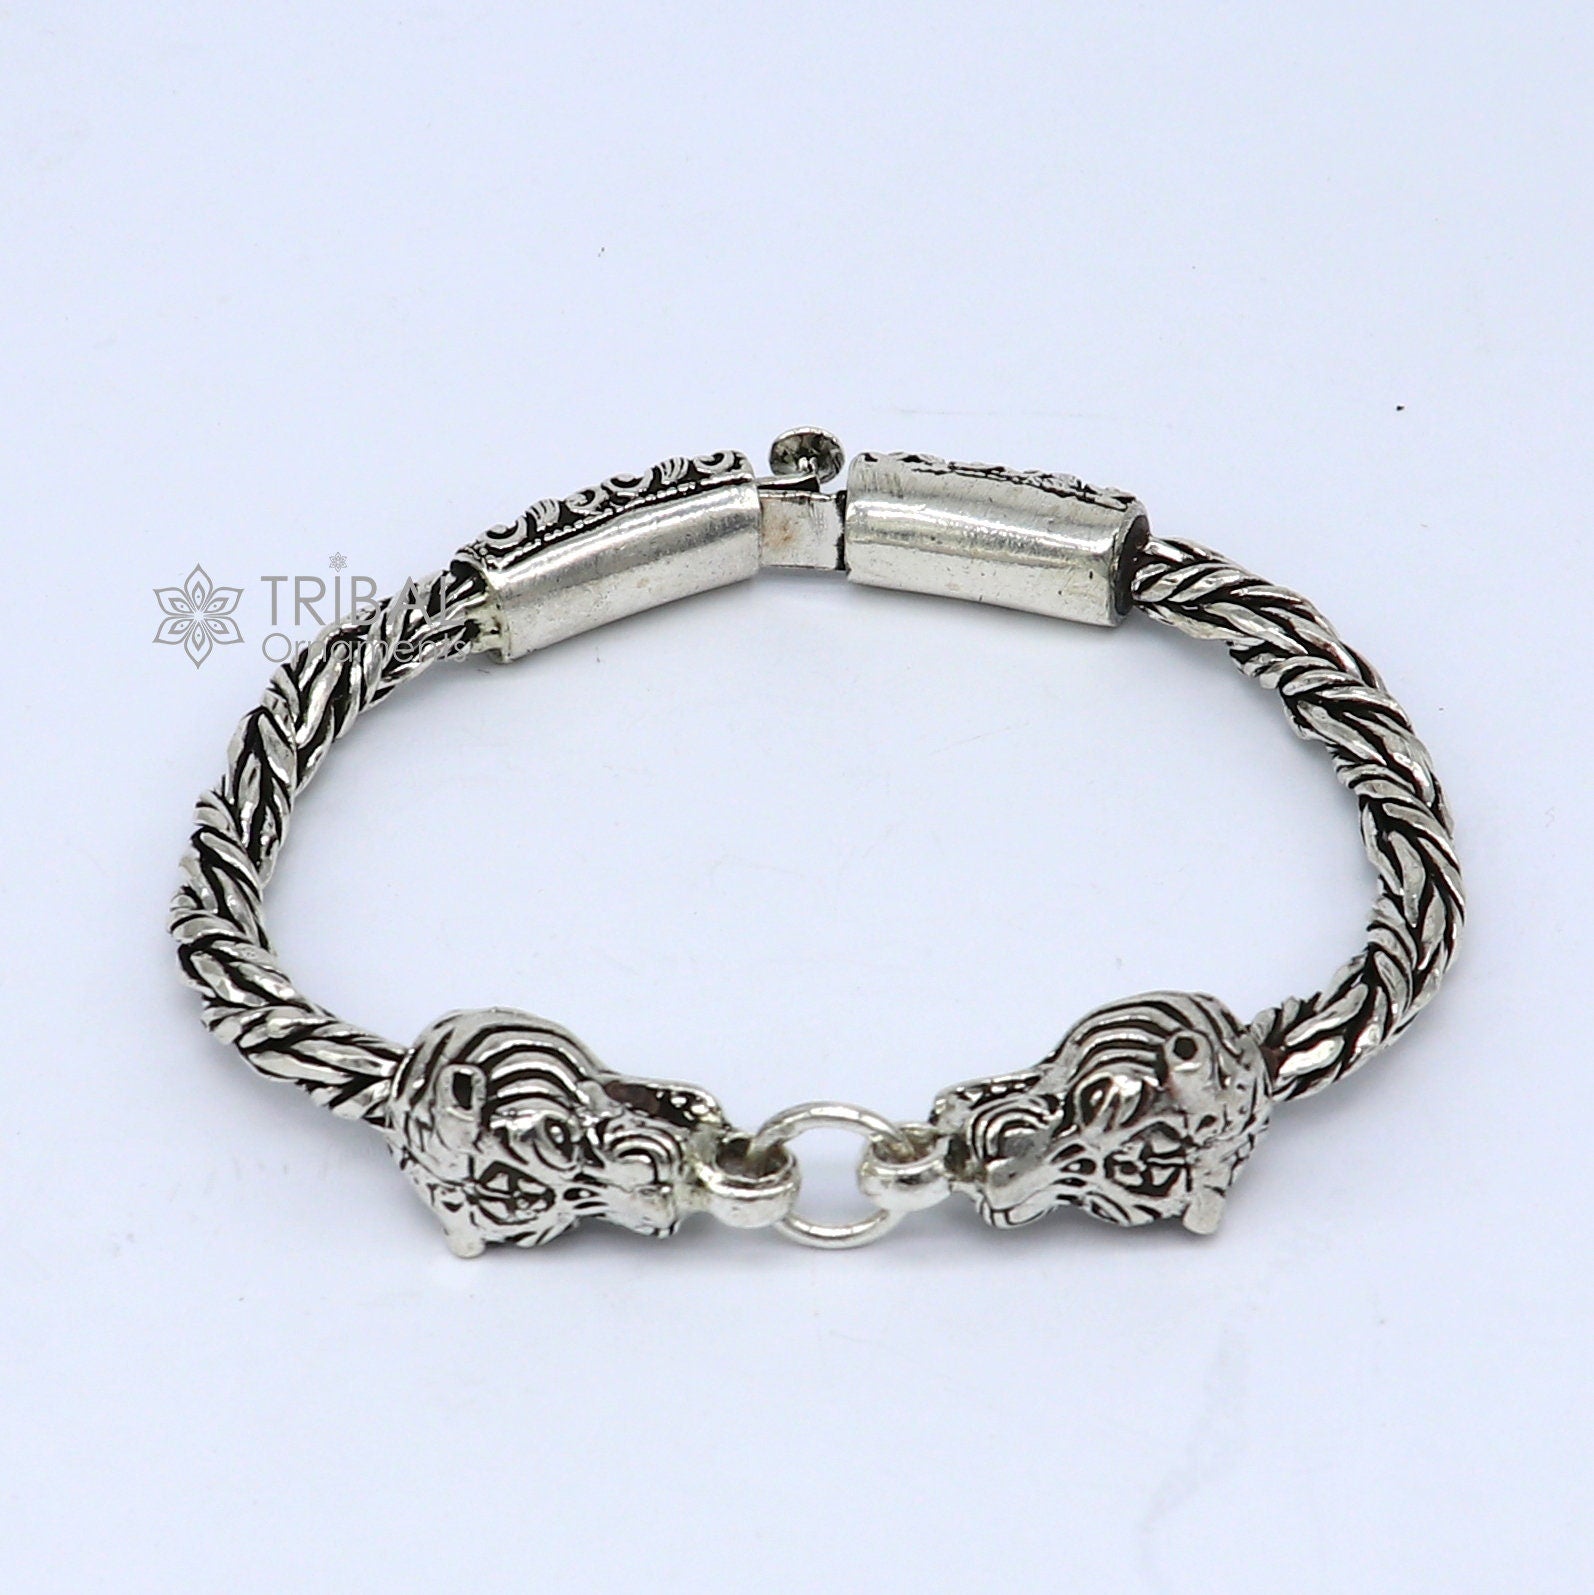 925 sterling silver Unique handmade chain solid bracelet with gorgeous lion face design antique stylish modern gifting jewelry sbr702 - TRIBAL ORNAMENTS